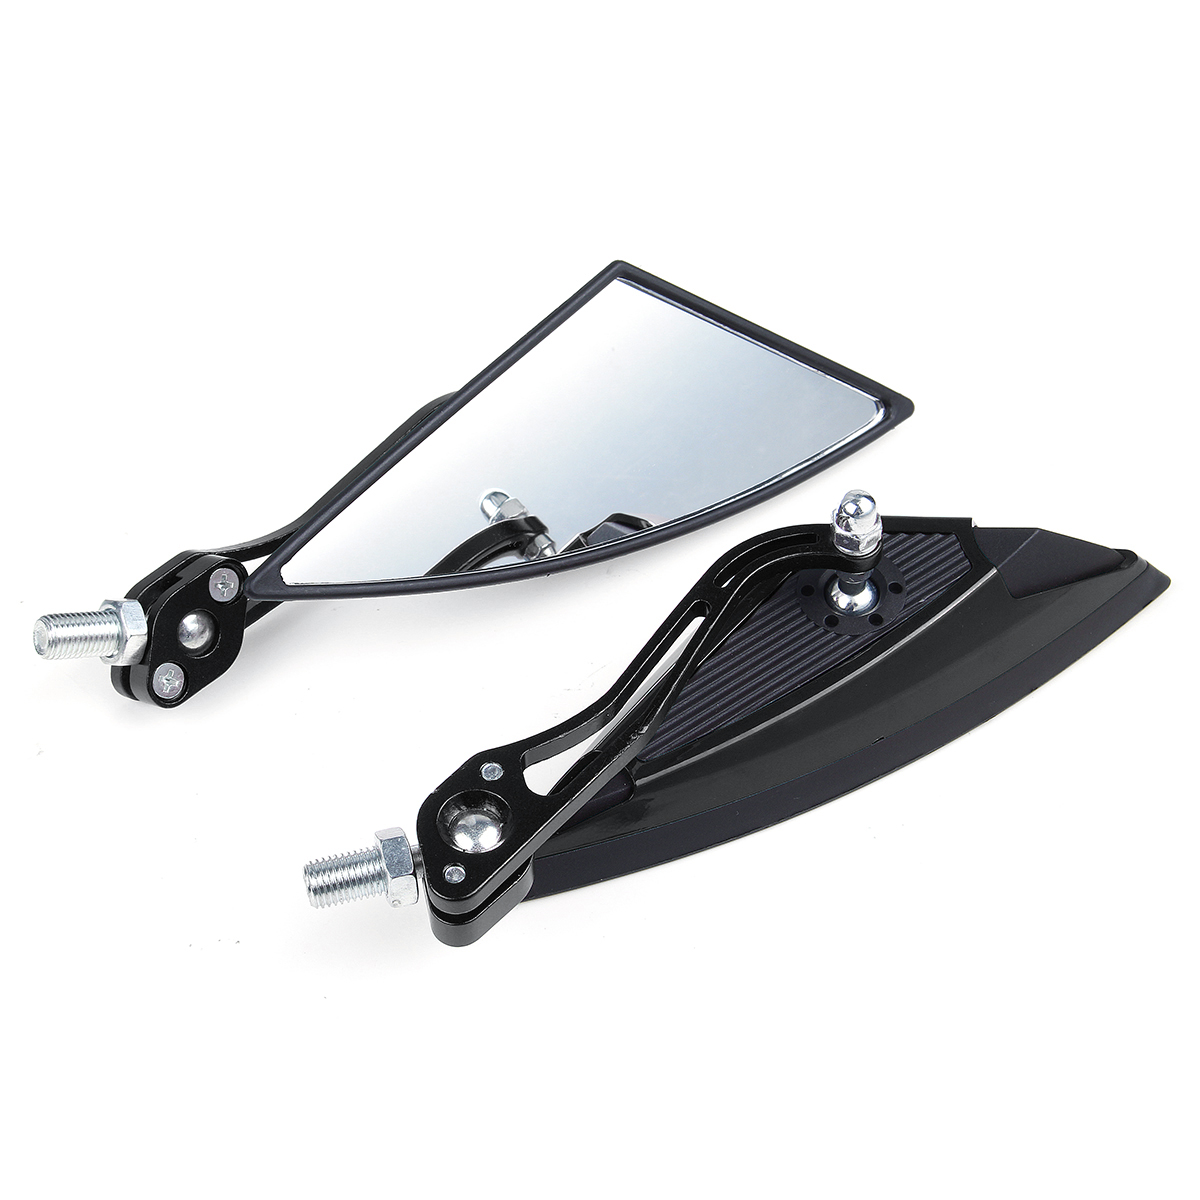 Pair Universal Motorcycle Aluminum Rod Rearview Side Mirrors Triangle